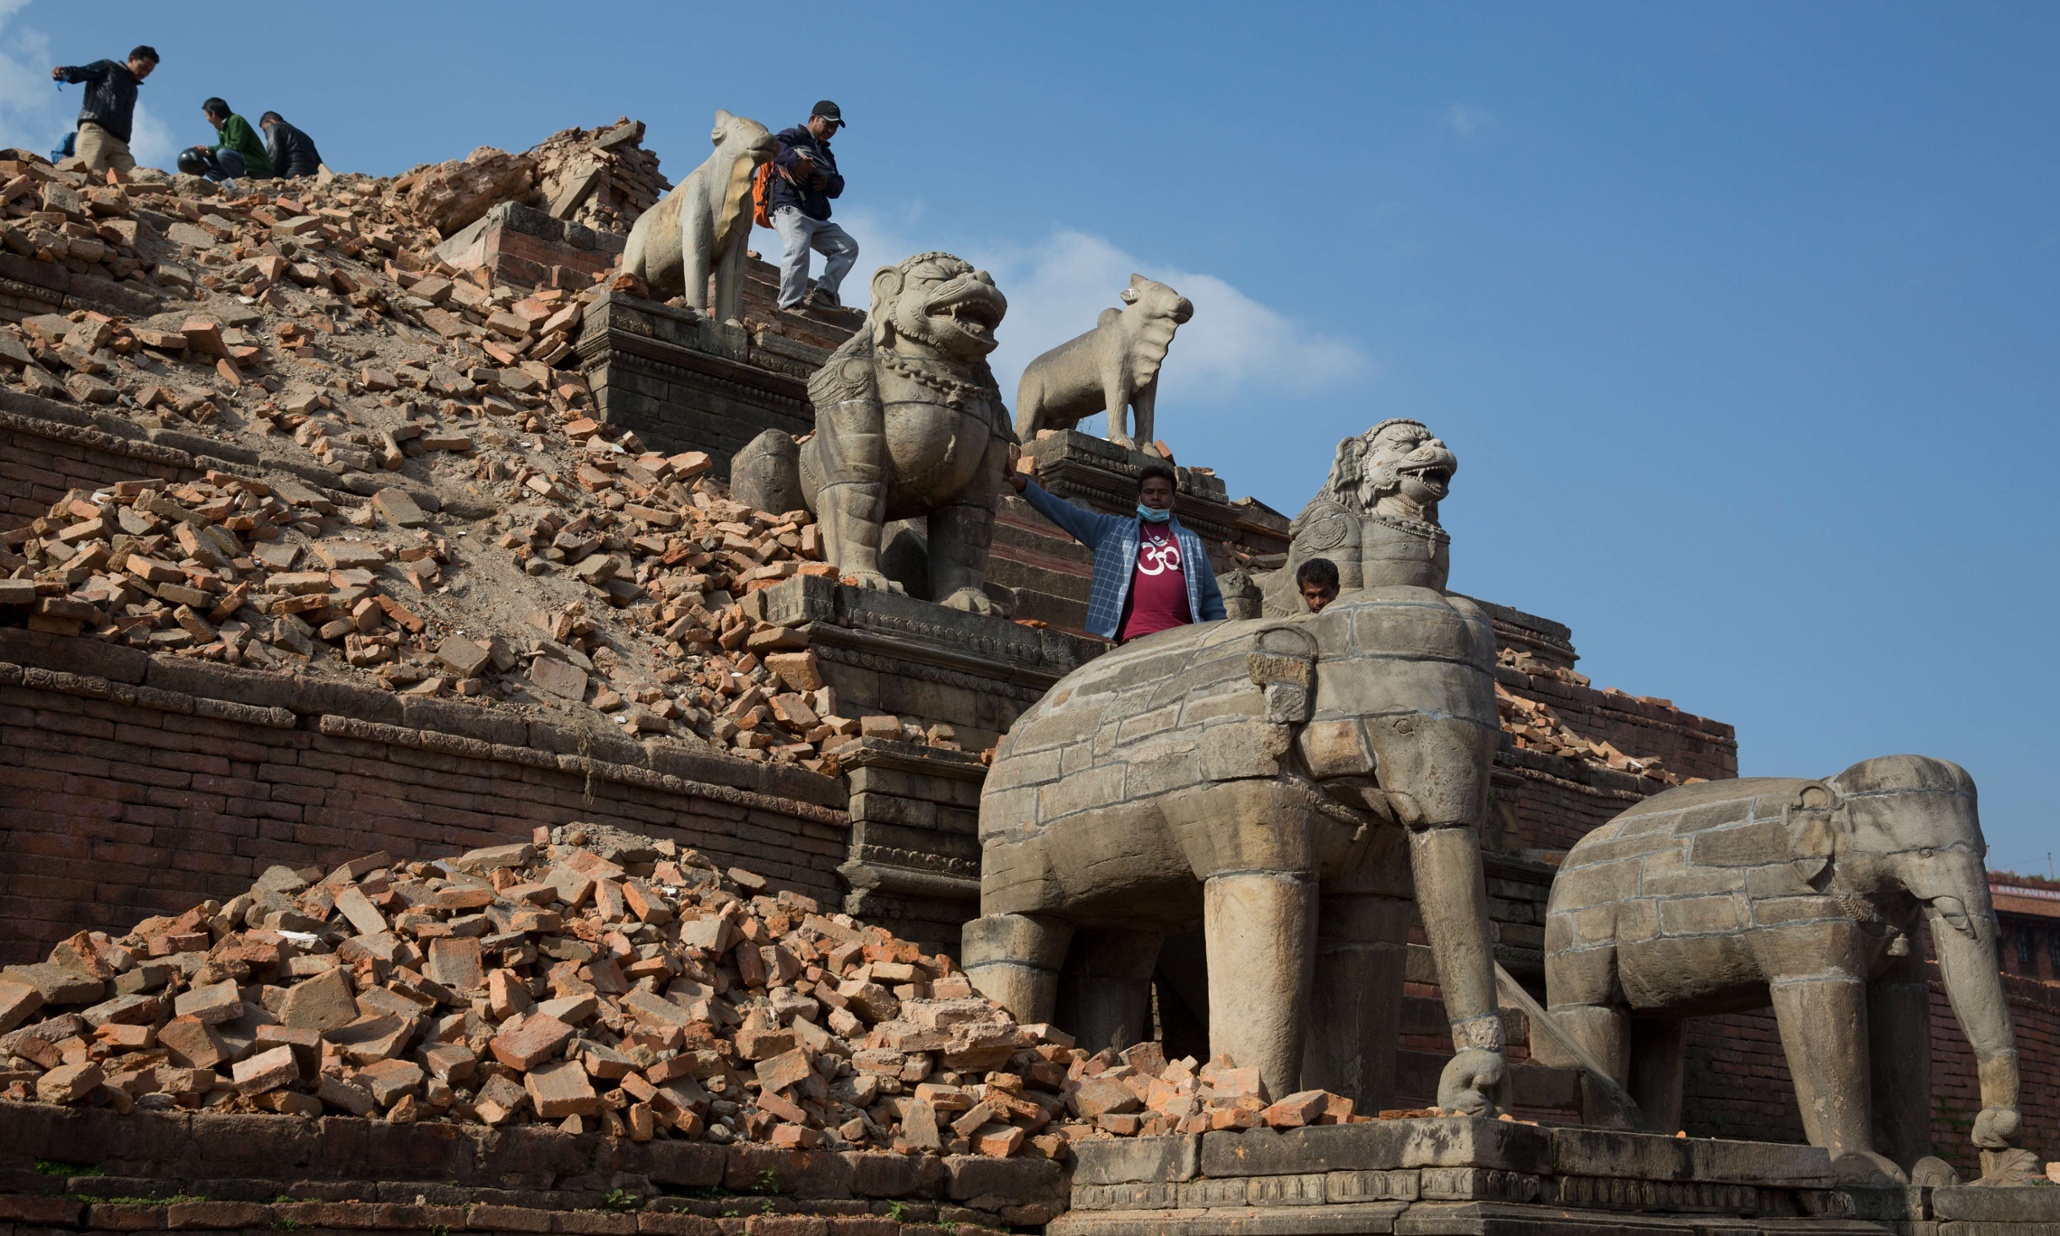 Nepal begins to assess its cultural losses after earthquake